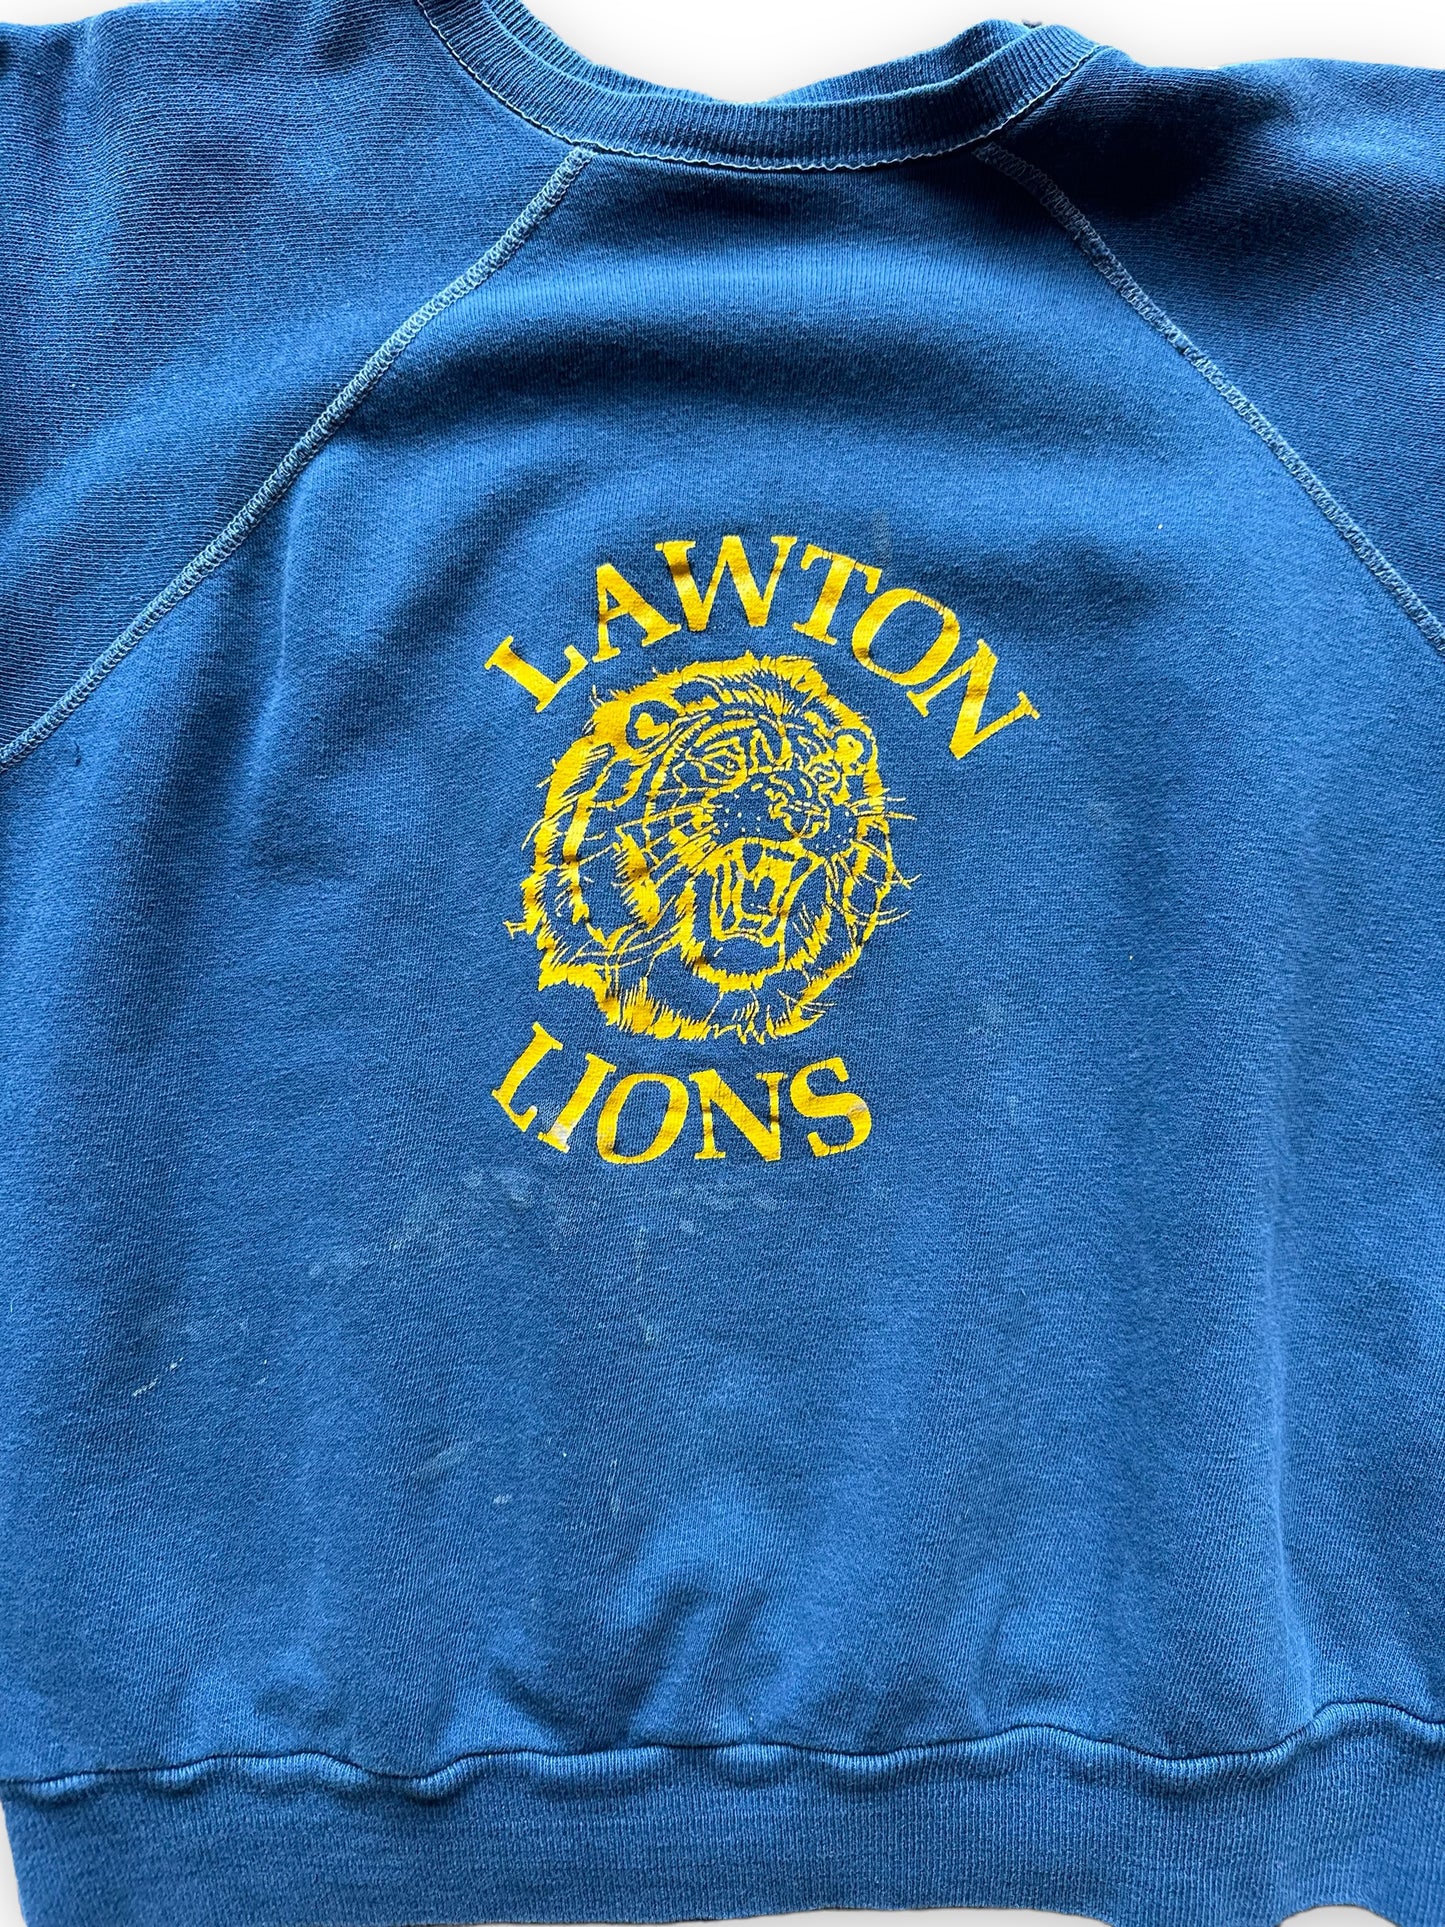 Graphic View on Vintage Small Lawton Lions Crewneck Sweatshirt | Vintage Crewneck Sweatshirt Seattle | Barn Owl Vintage Clothing